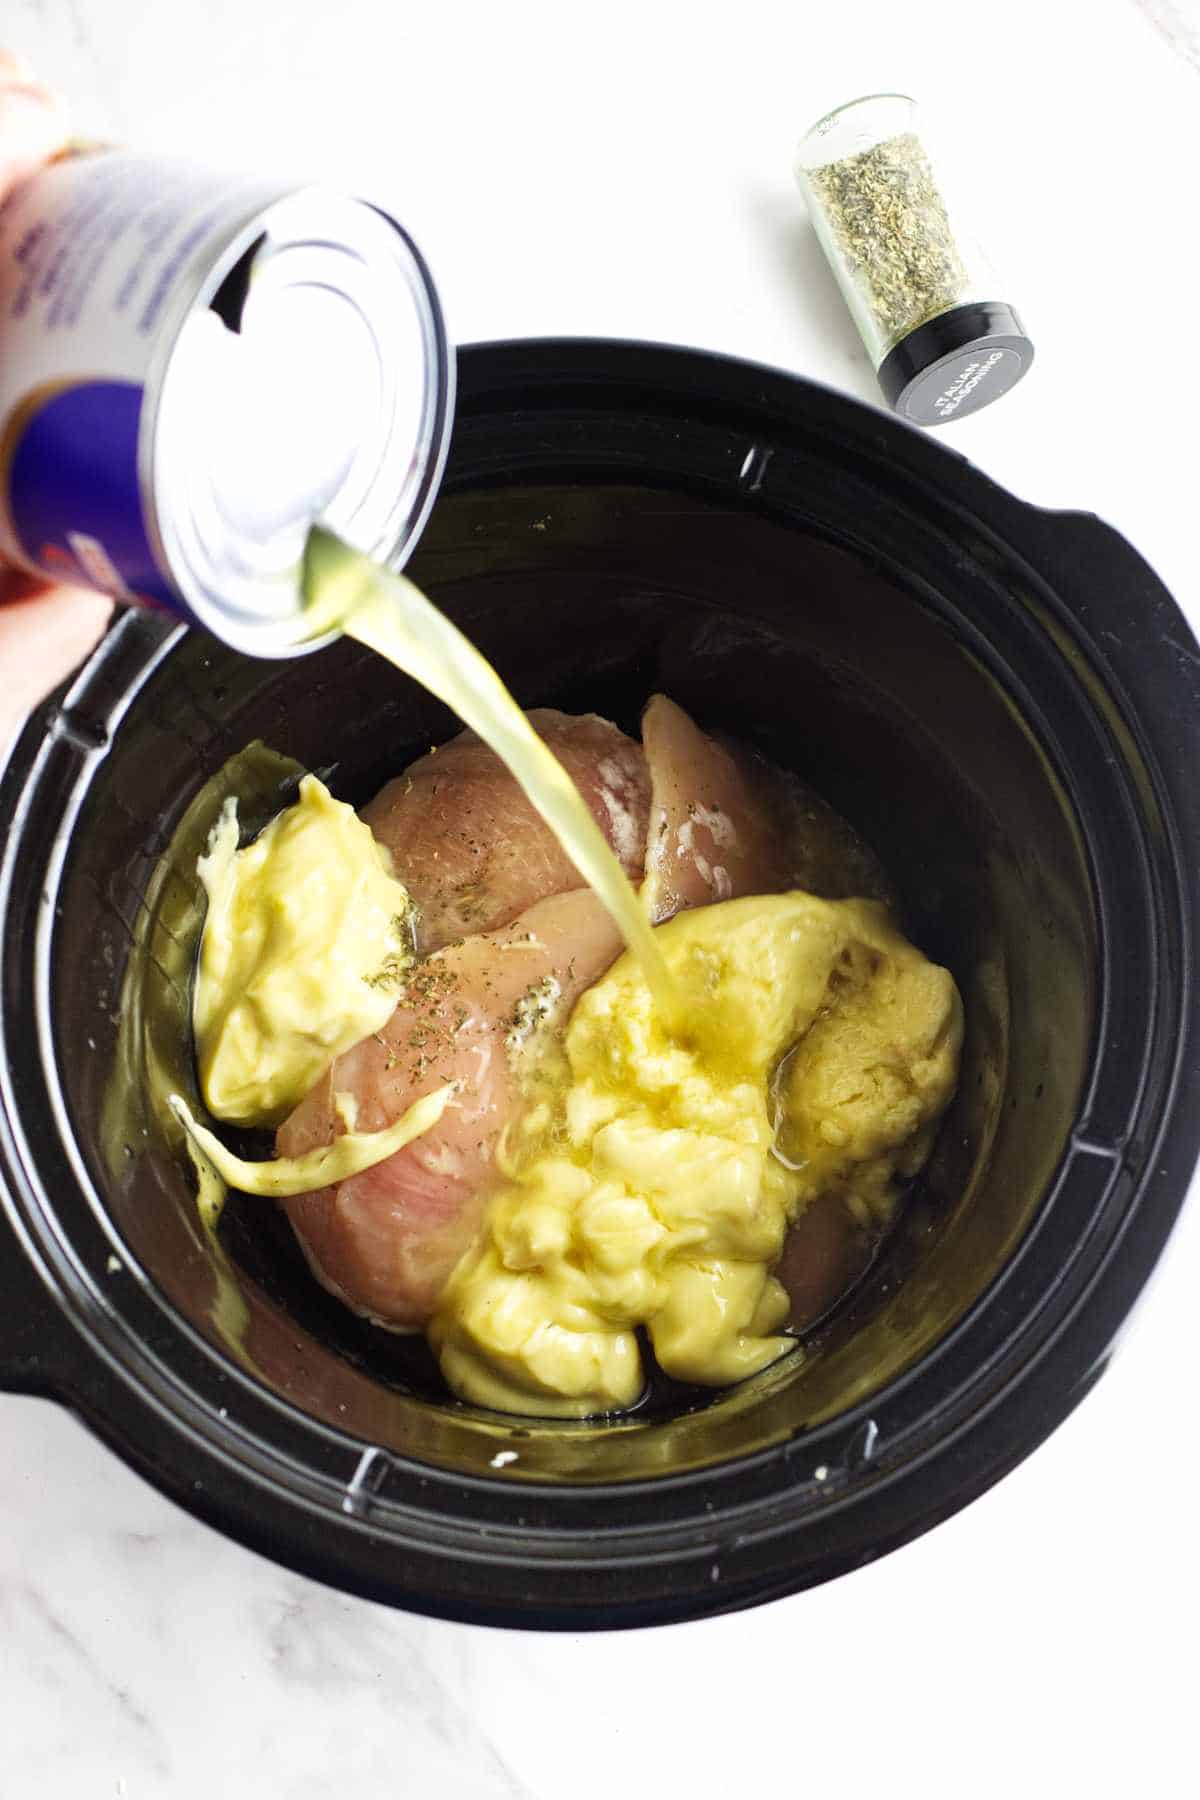 soup and broth in a crockpot on top of thighs or breast meat.